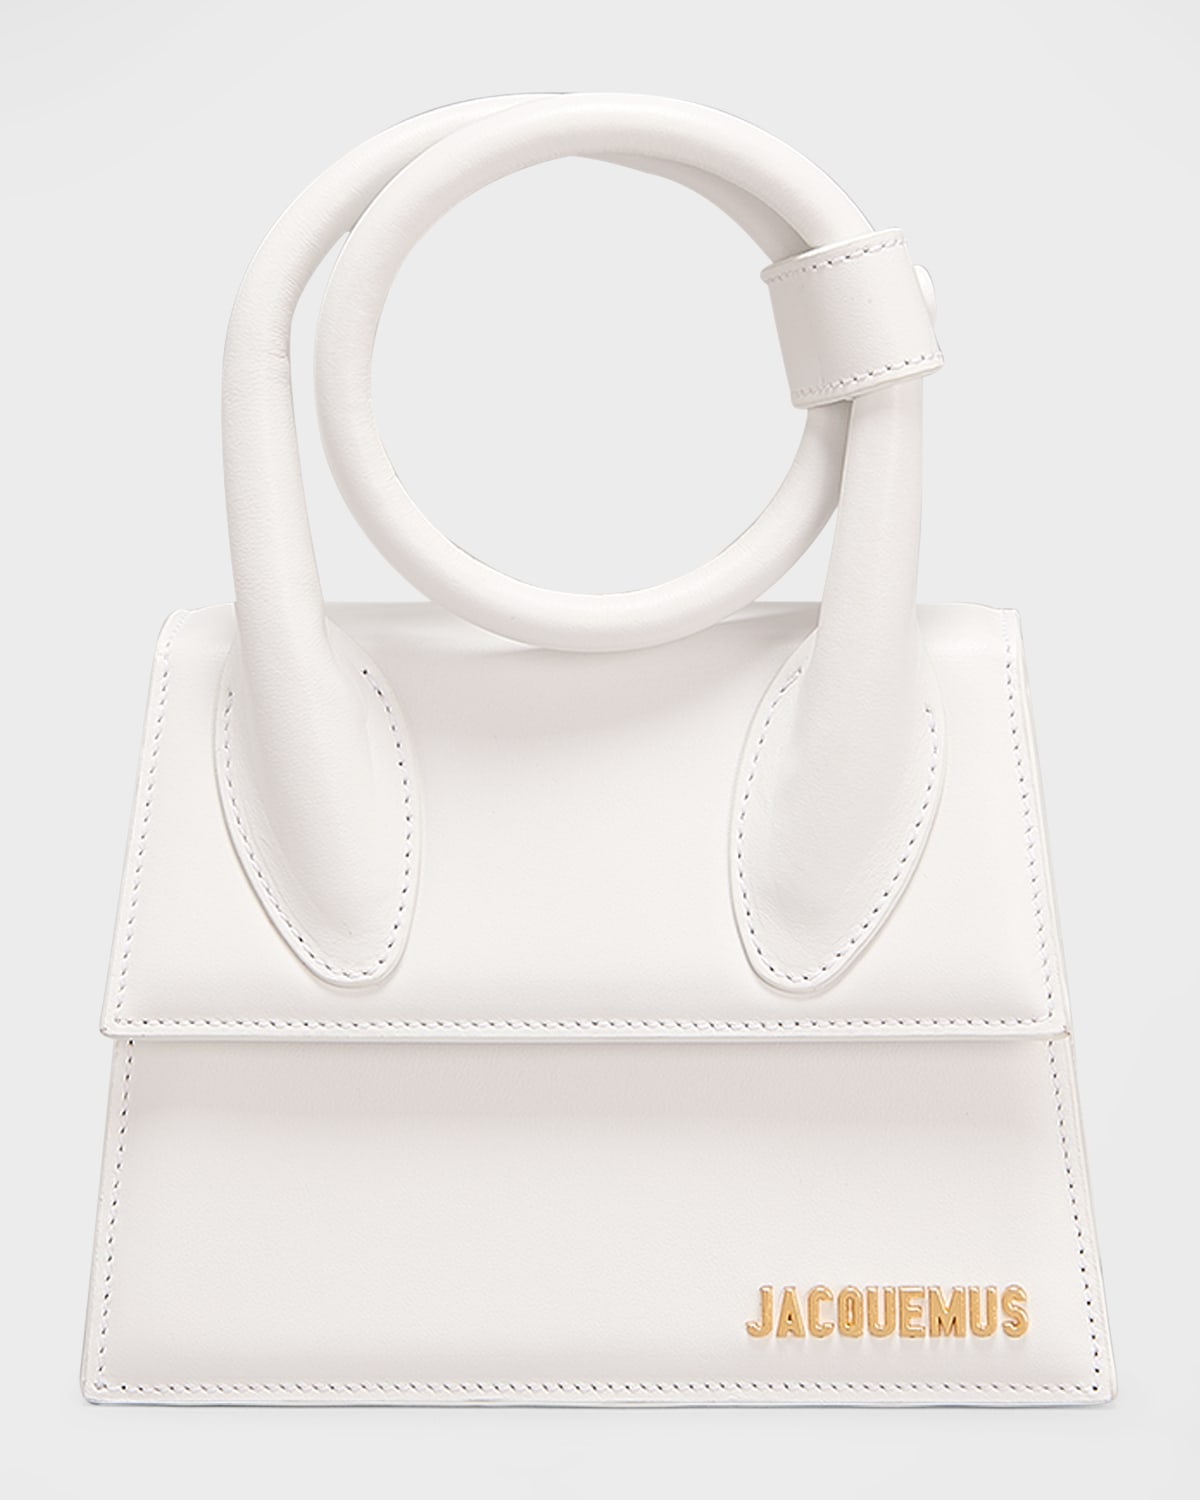 Jacquemus Le Chiquito Noeud Satchel Bag In White | ModeSens